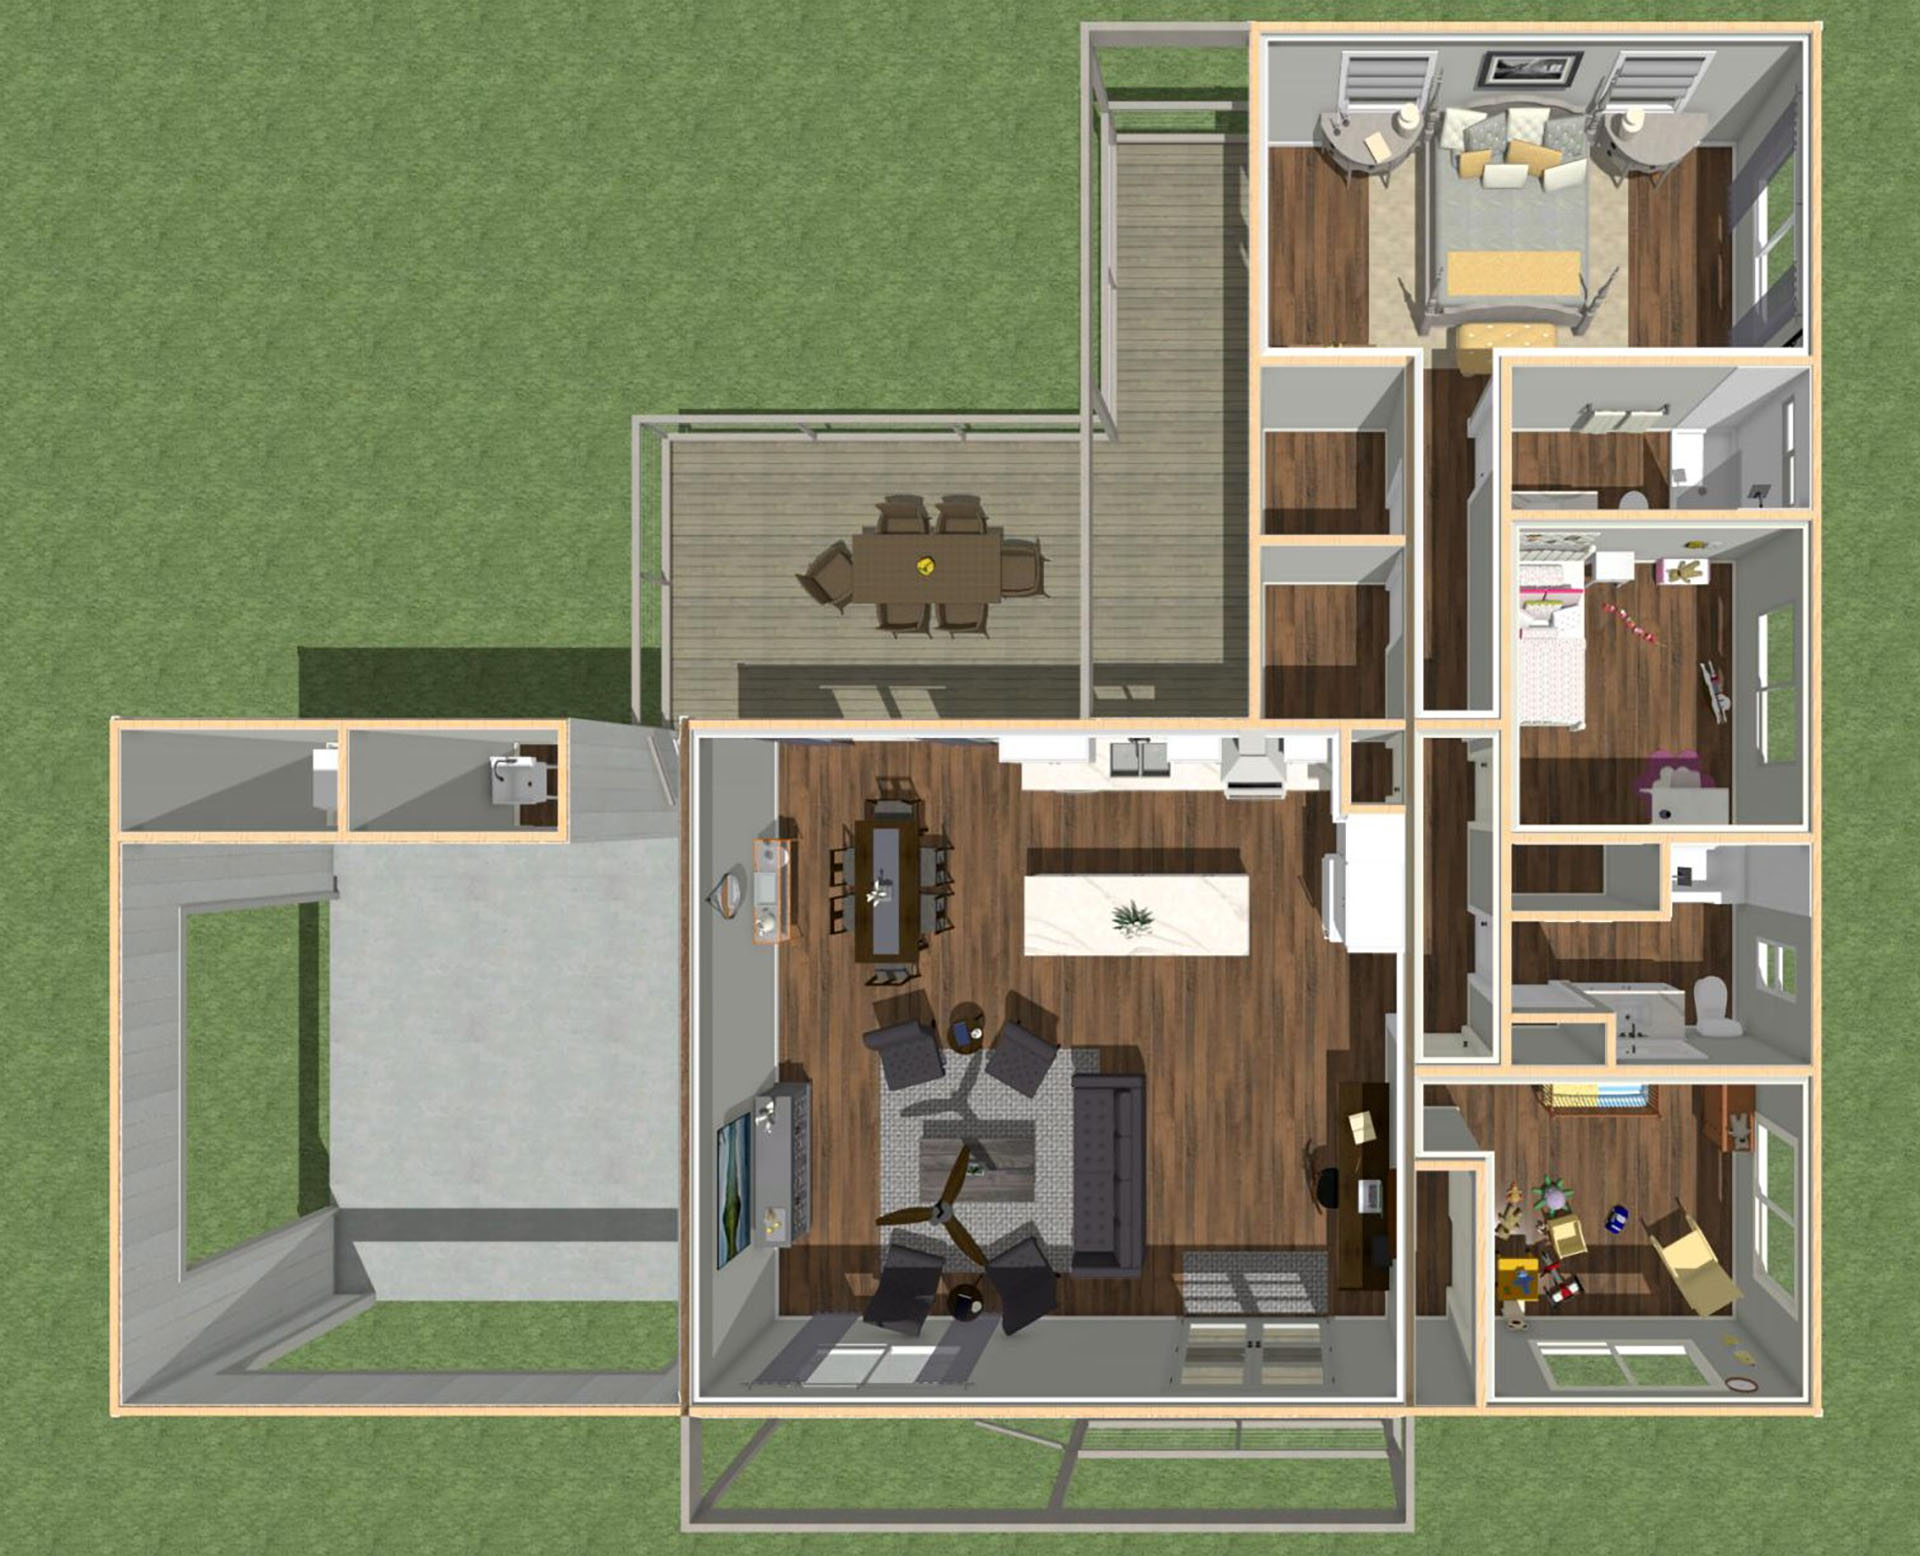 Haouli Floor plan overview zoomed out